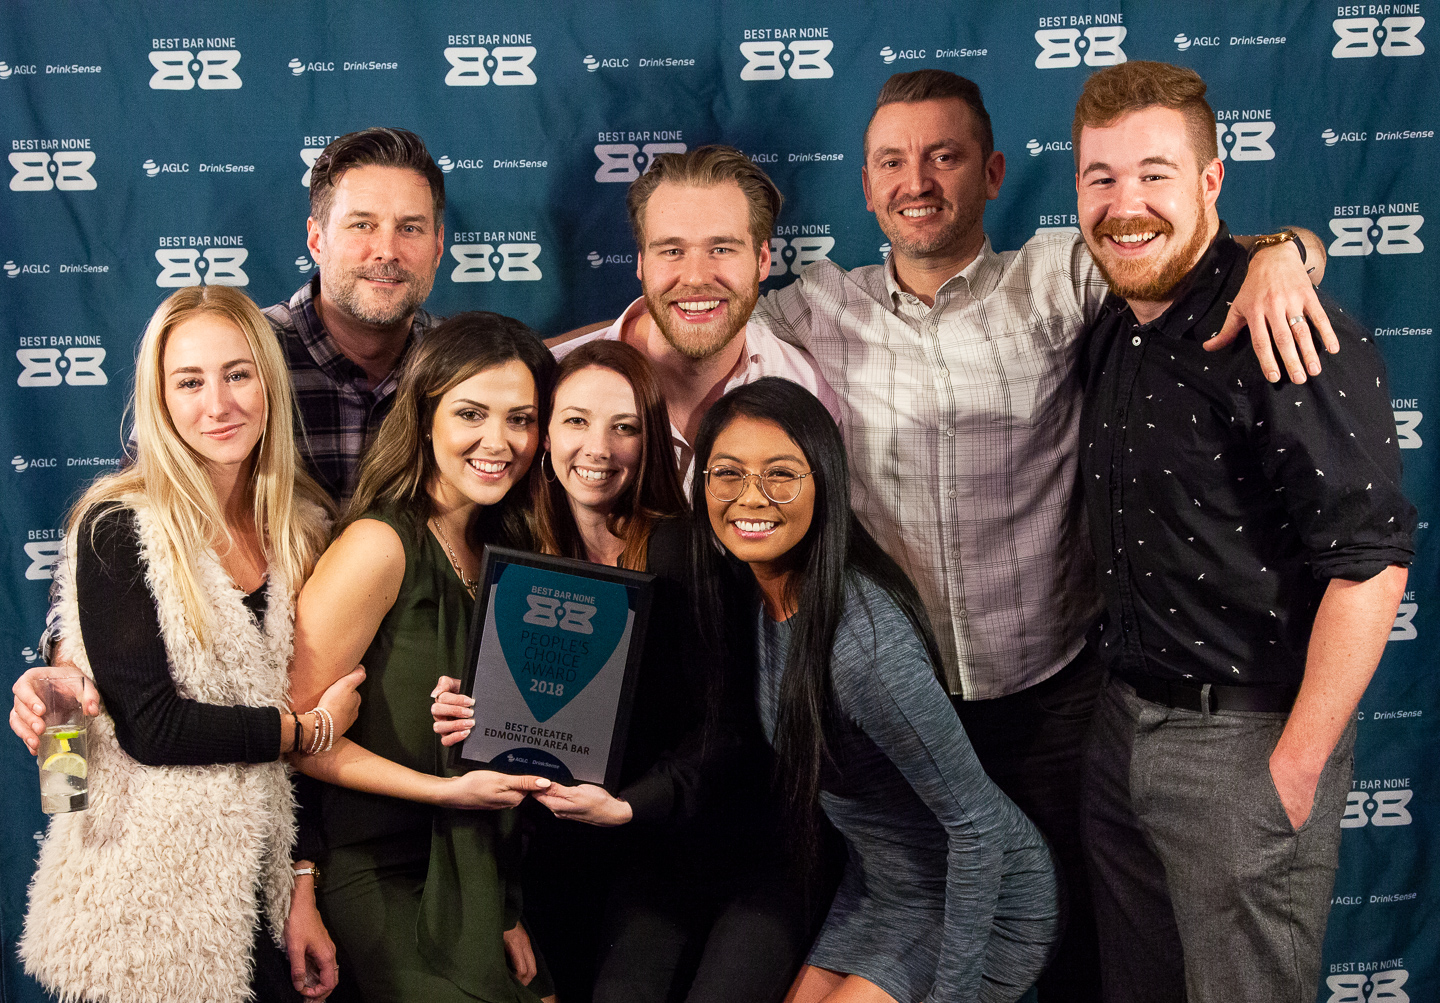 The inaugural awards for Greater Edmonton Area went to Central Social Hall (St. Albert) and Local Public Eatery (Sherwood Park) for their customer service excellence and commitment to responsible liquor service